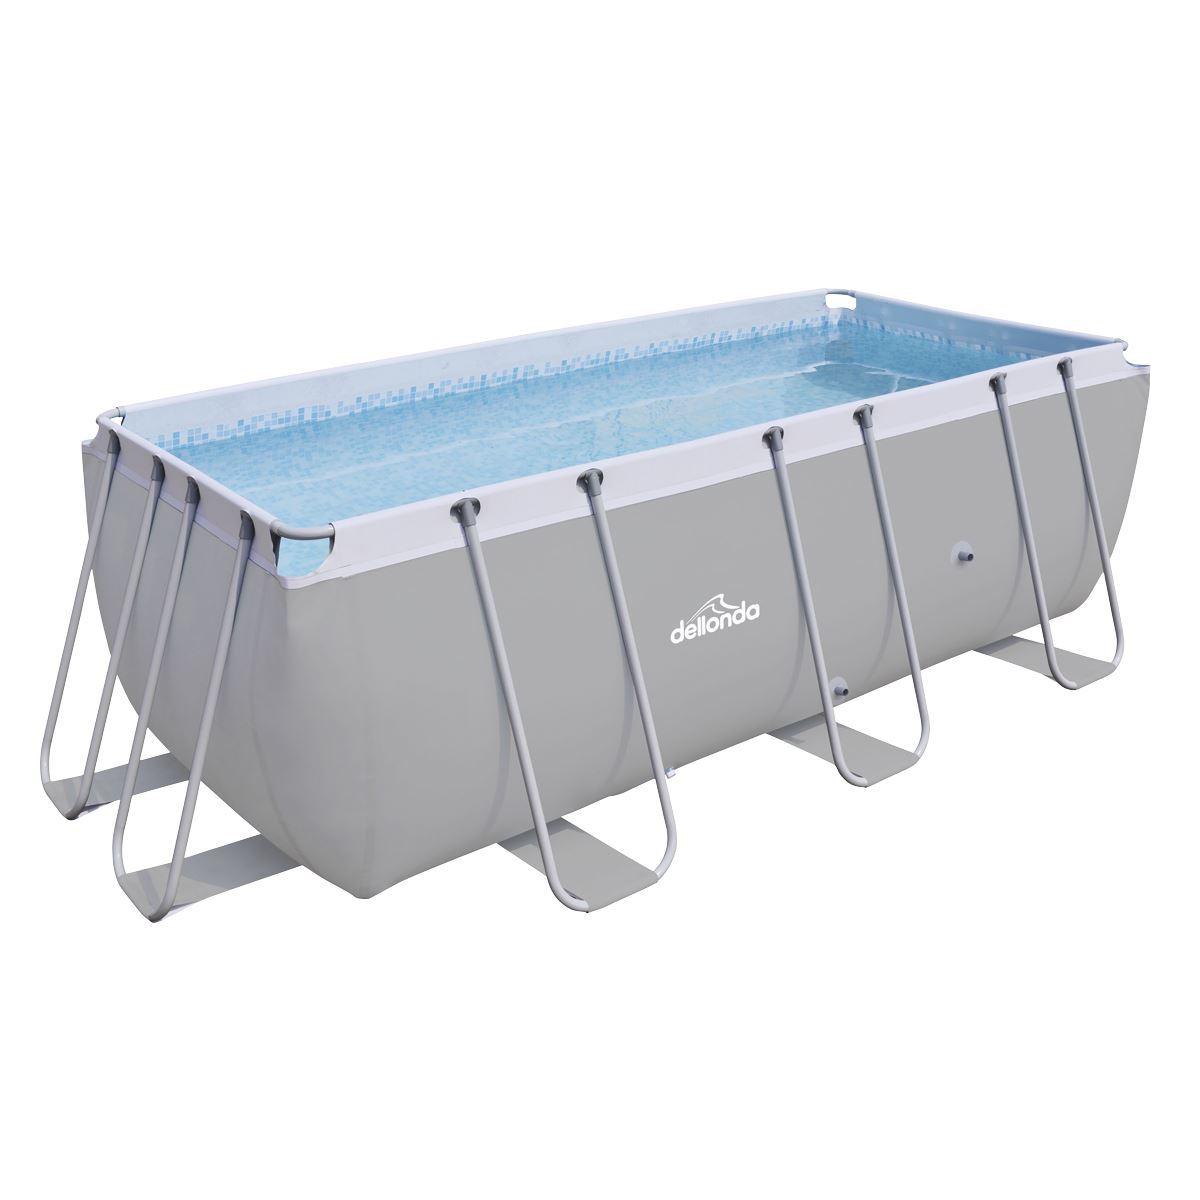 Dellonda 13ft Deluxe Steel Swimming Pool with Filter Pump